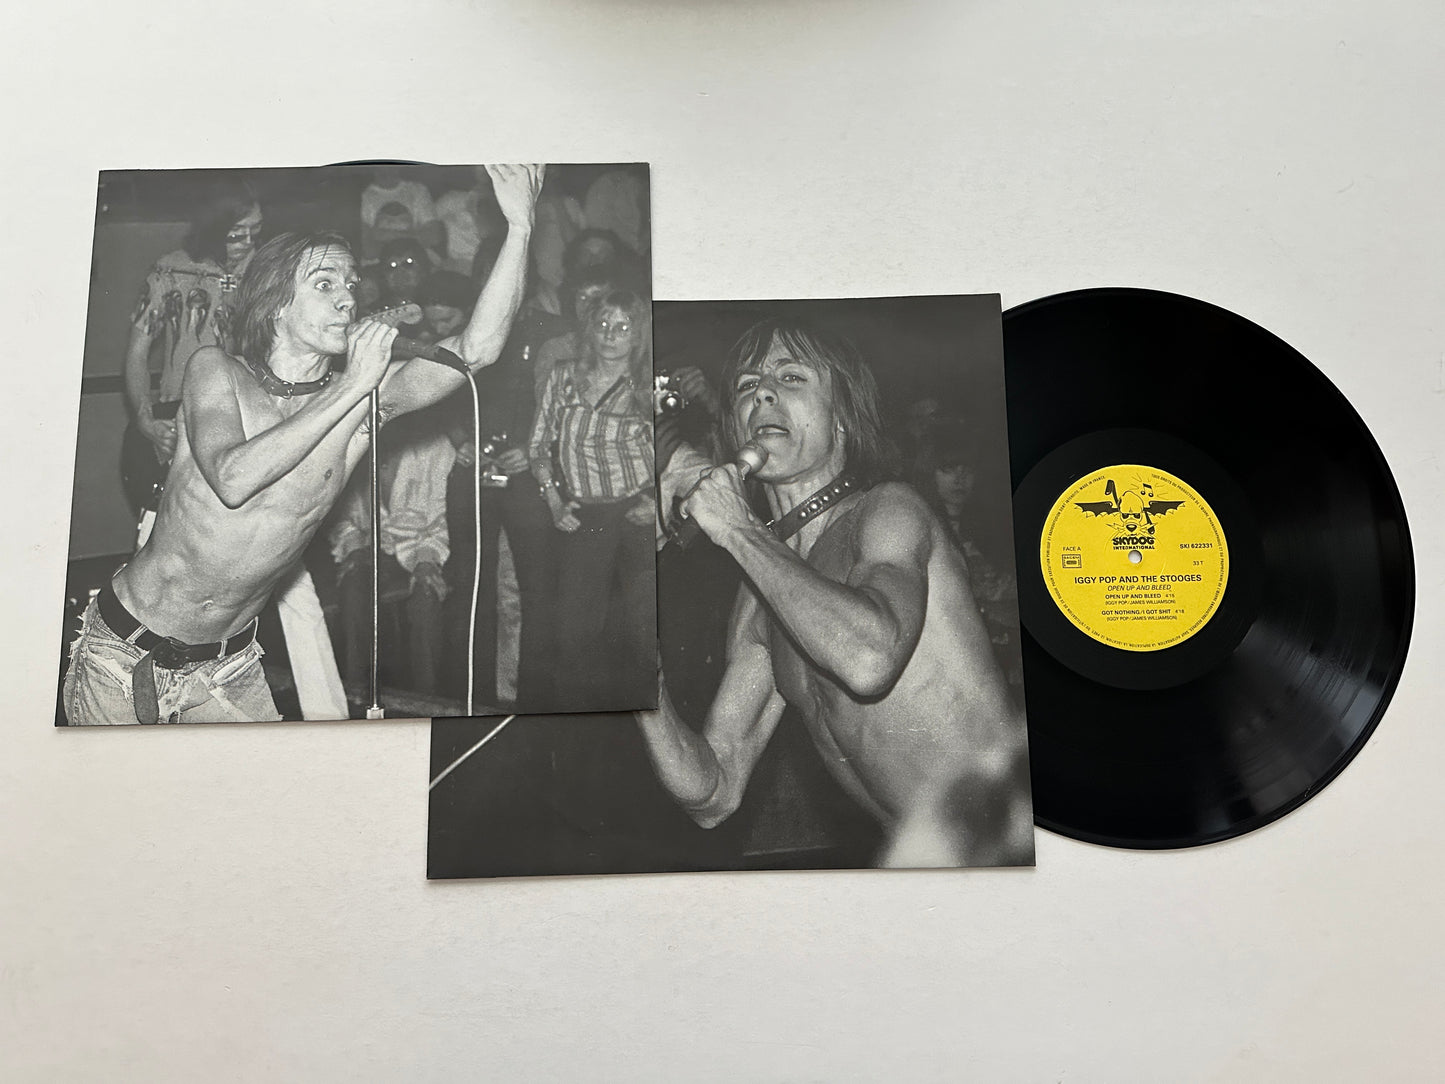 Iggy and the Stooges - Metallic - 2 x KC